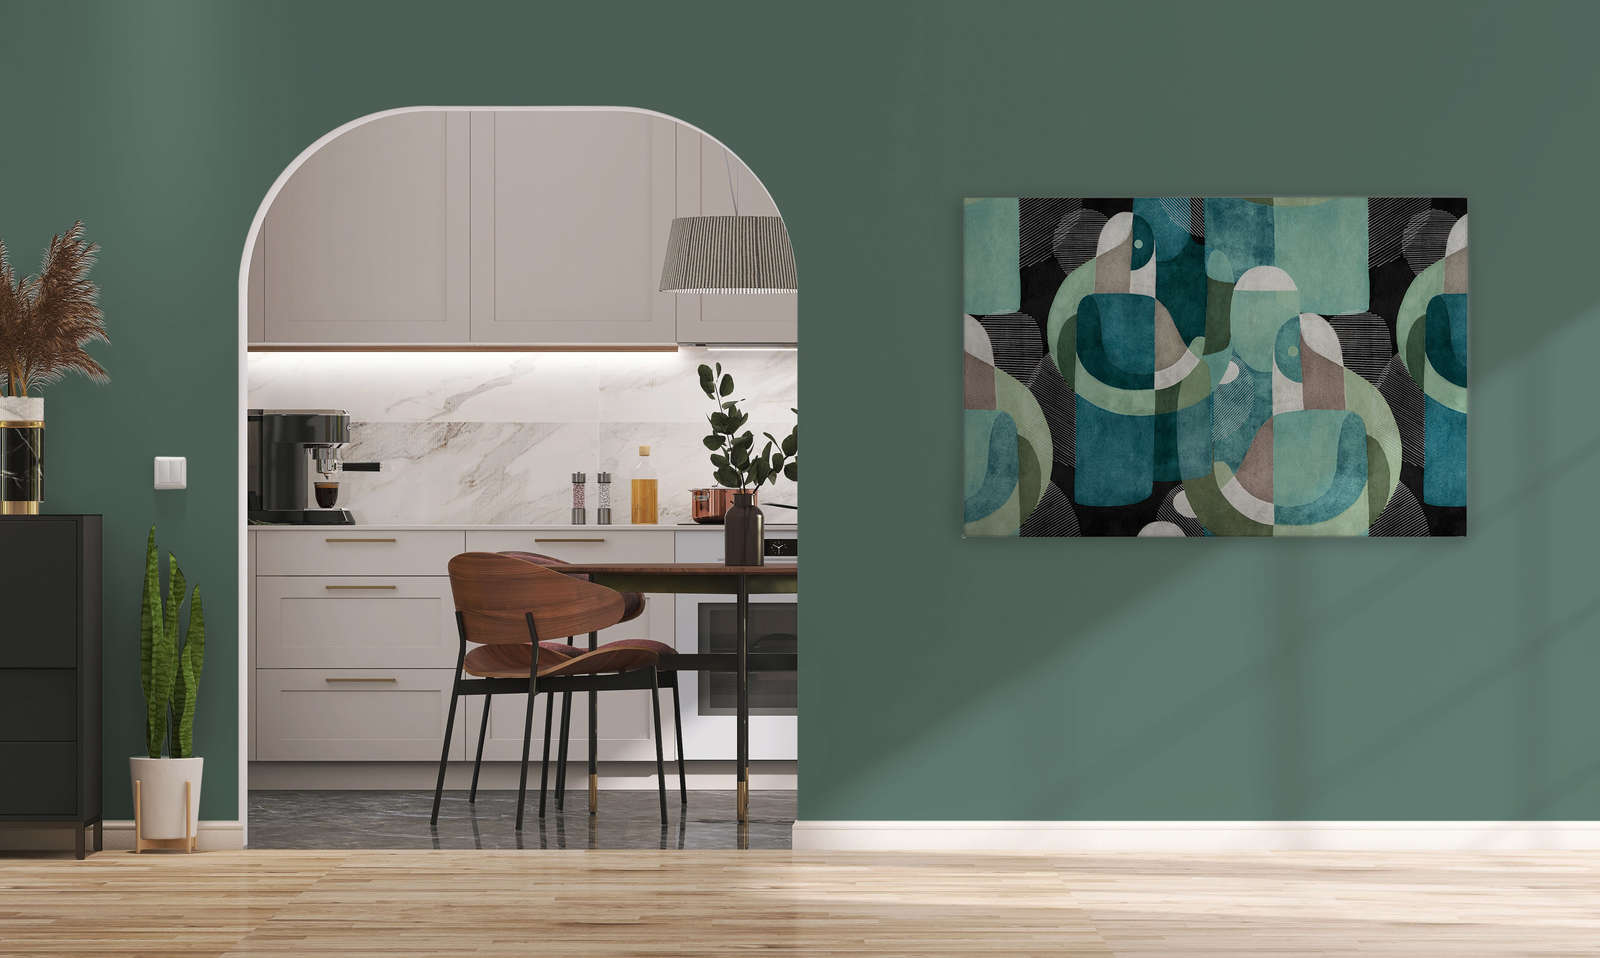             Meeting Place 1 - Canvas painting abstract ethno design in black & green - 1,20 m x 0,80 m
        